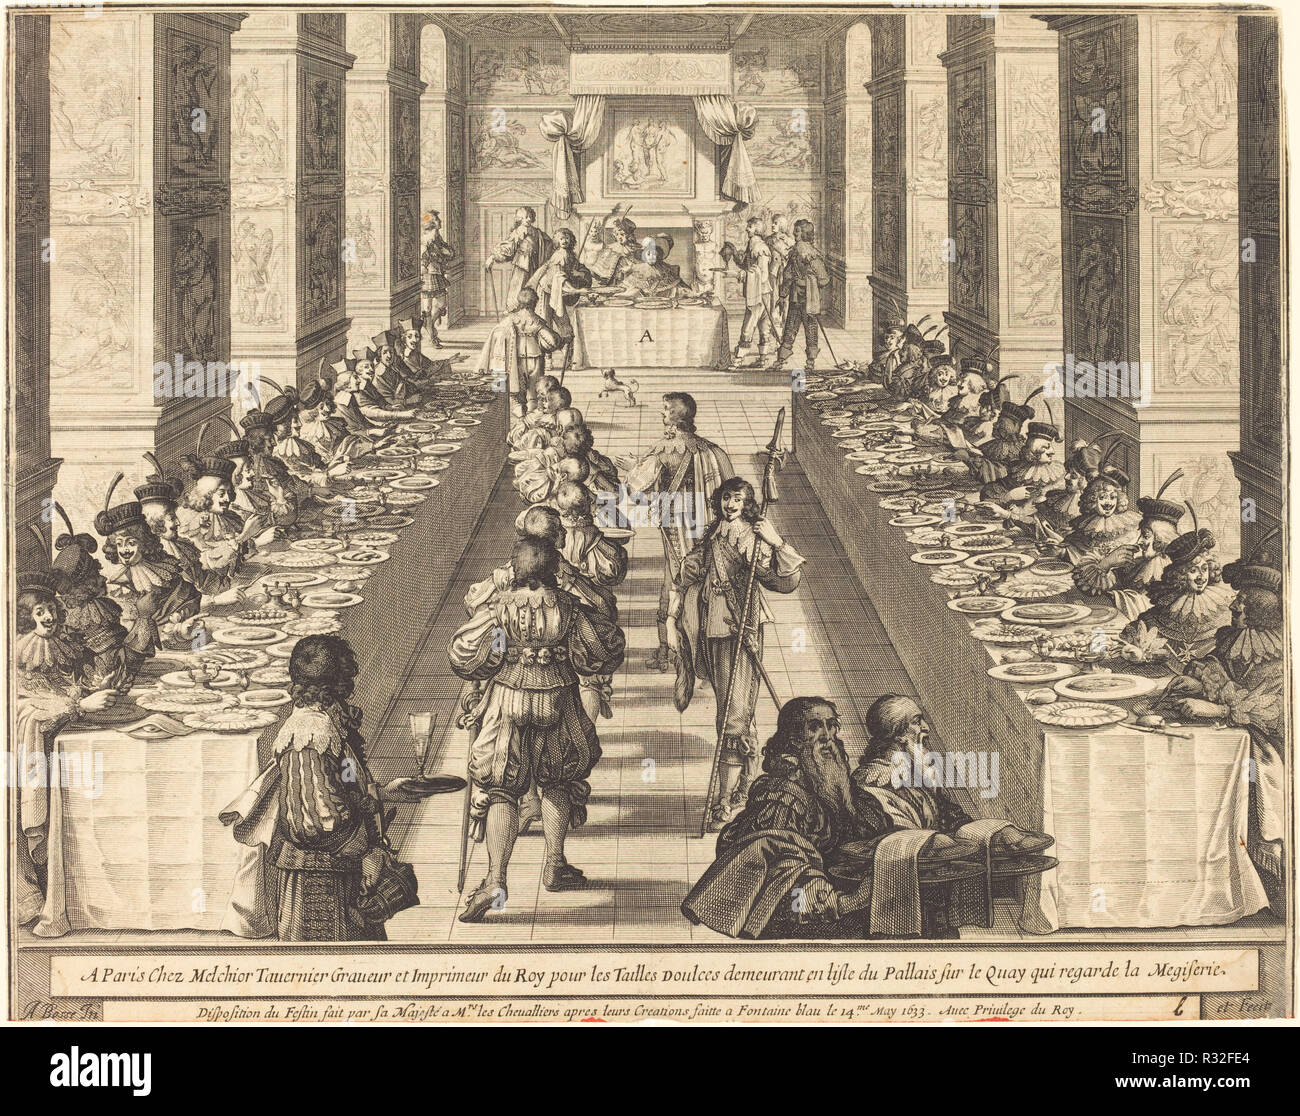 Banquet Given by the King to the New Knights. Dated: 1633. Dimensions: sheet (trimmed to plate mark): 27.2 x 34.5 cm (10 11/16 x 13 9/16 in.). Medium: etching and engraving. Museum: National Gallery of Art, Washington DC. Author: ABRAHAM BOSSE. Stock Photo